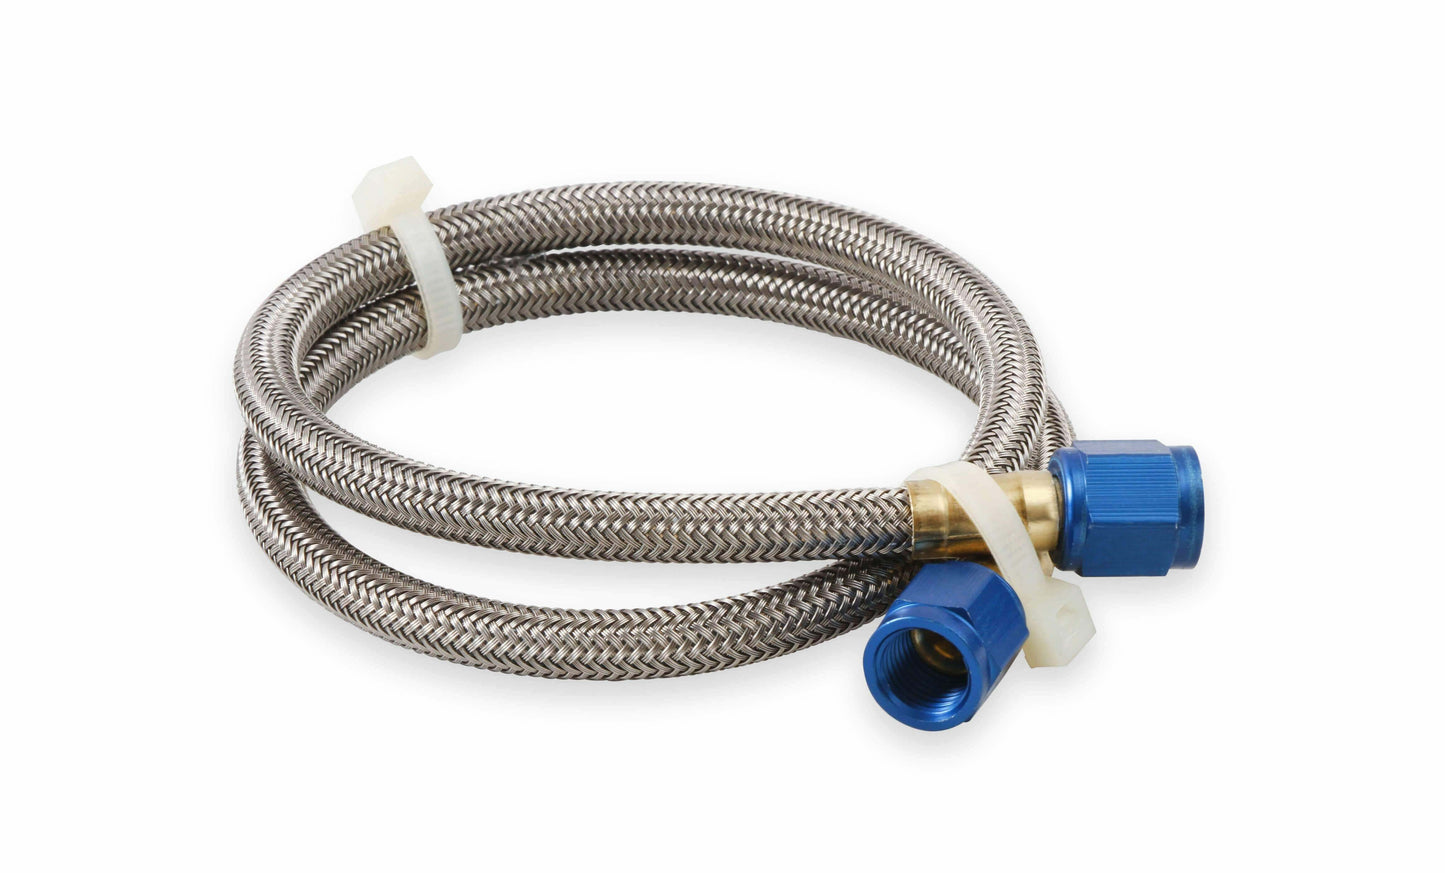 NOS Stainless Steel Braided Hose -4AN 2-foot Blue - 15230NOS